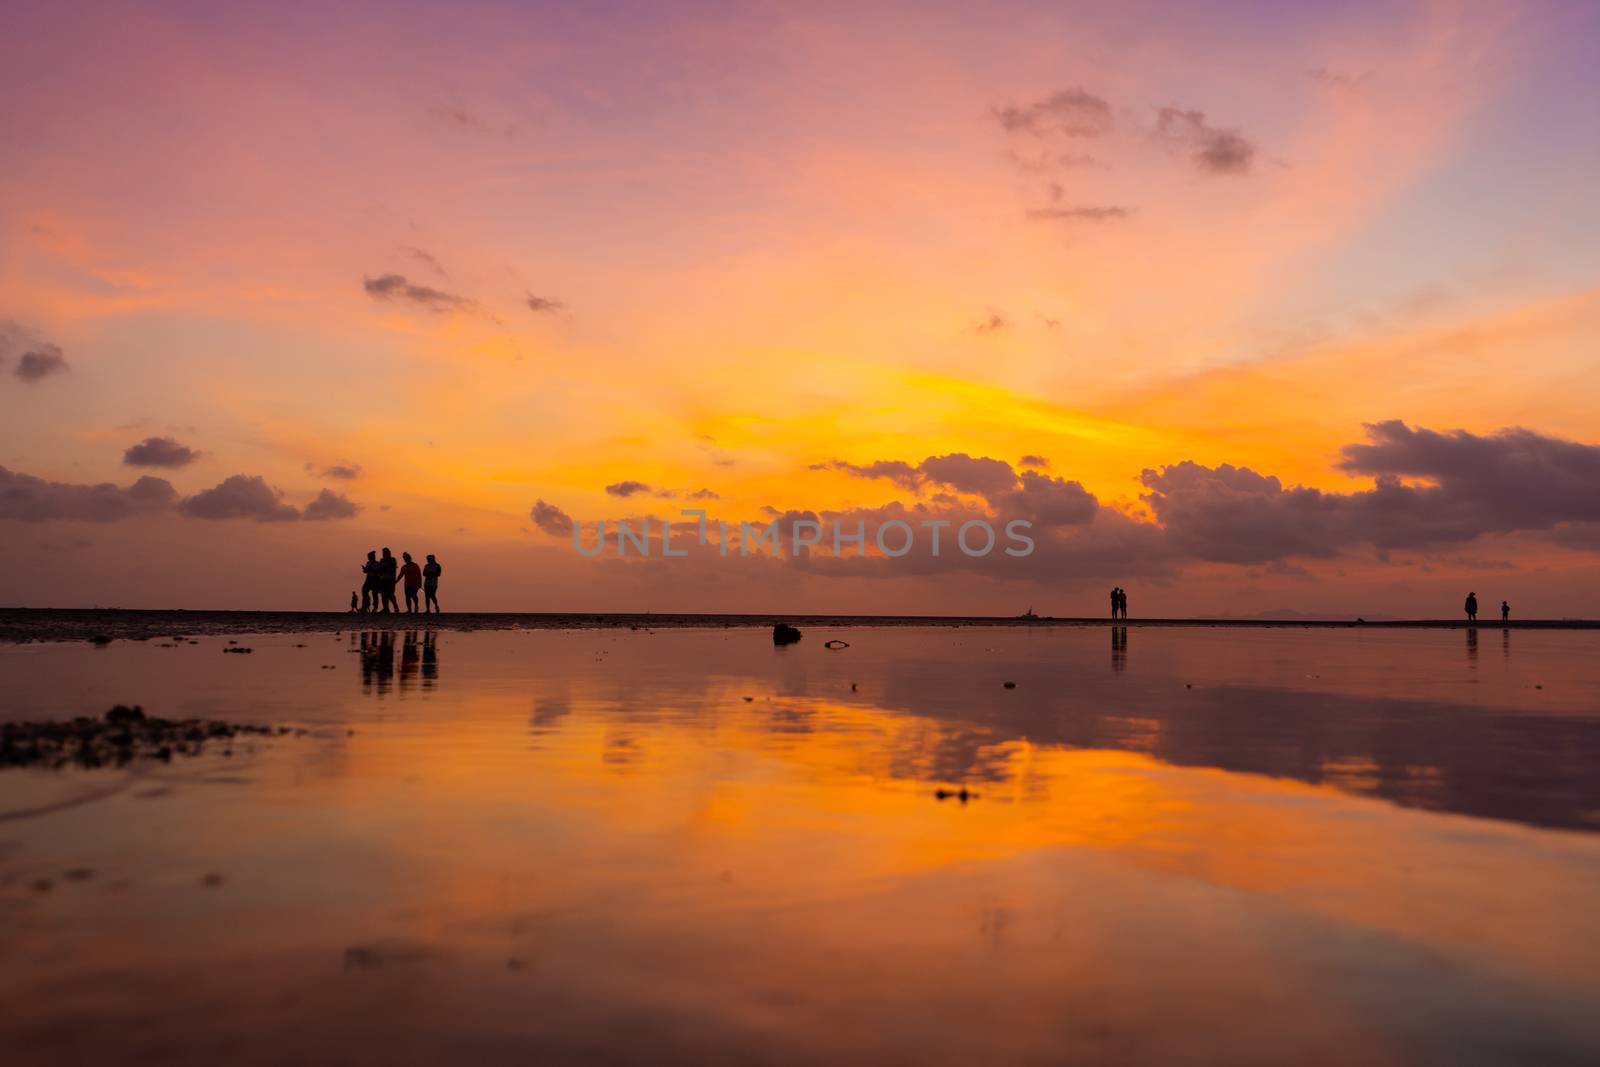 Burning bright sky during sunset on a tropical beach. Sunset during the exodus, the strength of people walking on water.